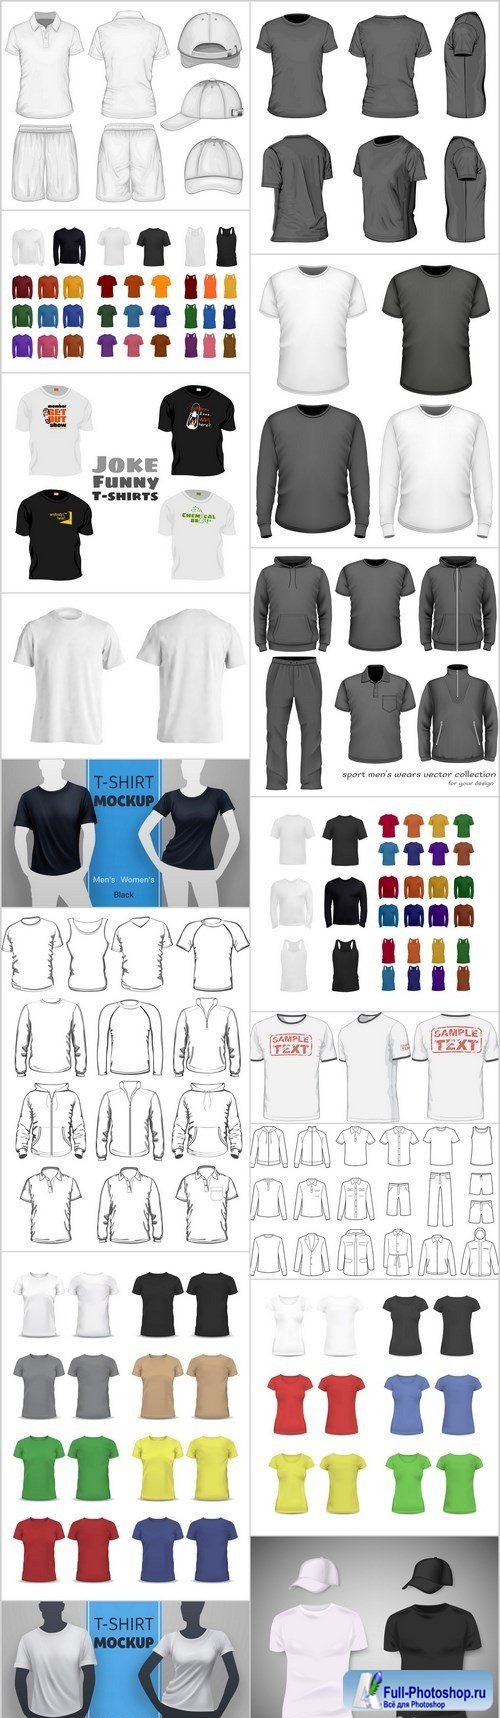 T-Shirts & Clothes Design - 16xEPS Vector Stock